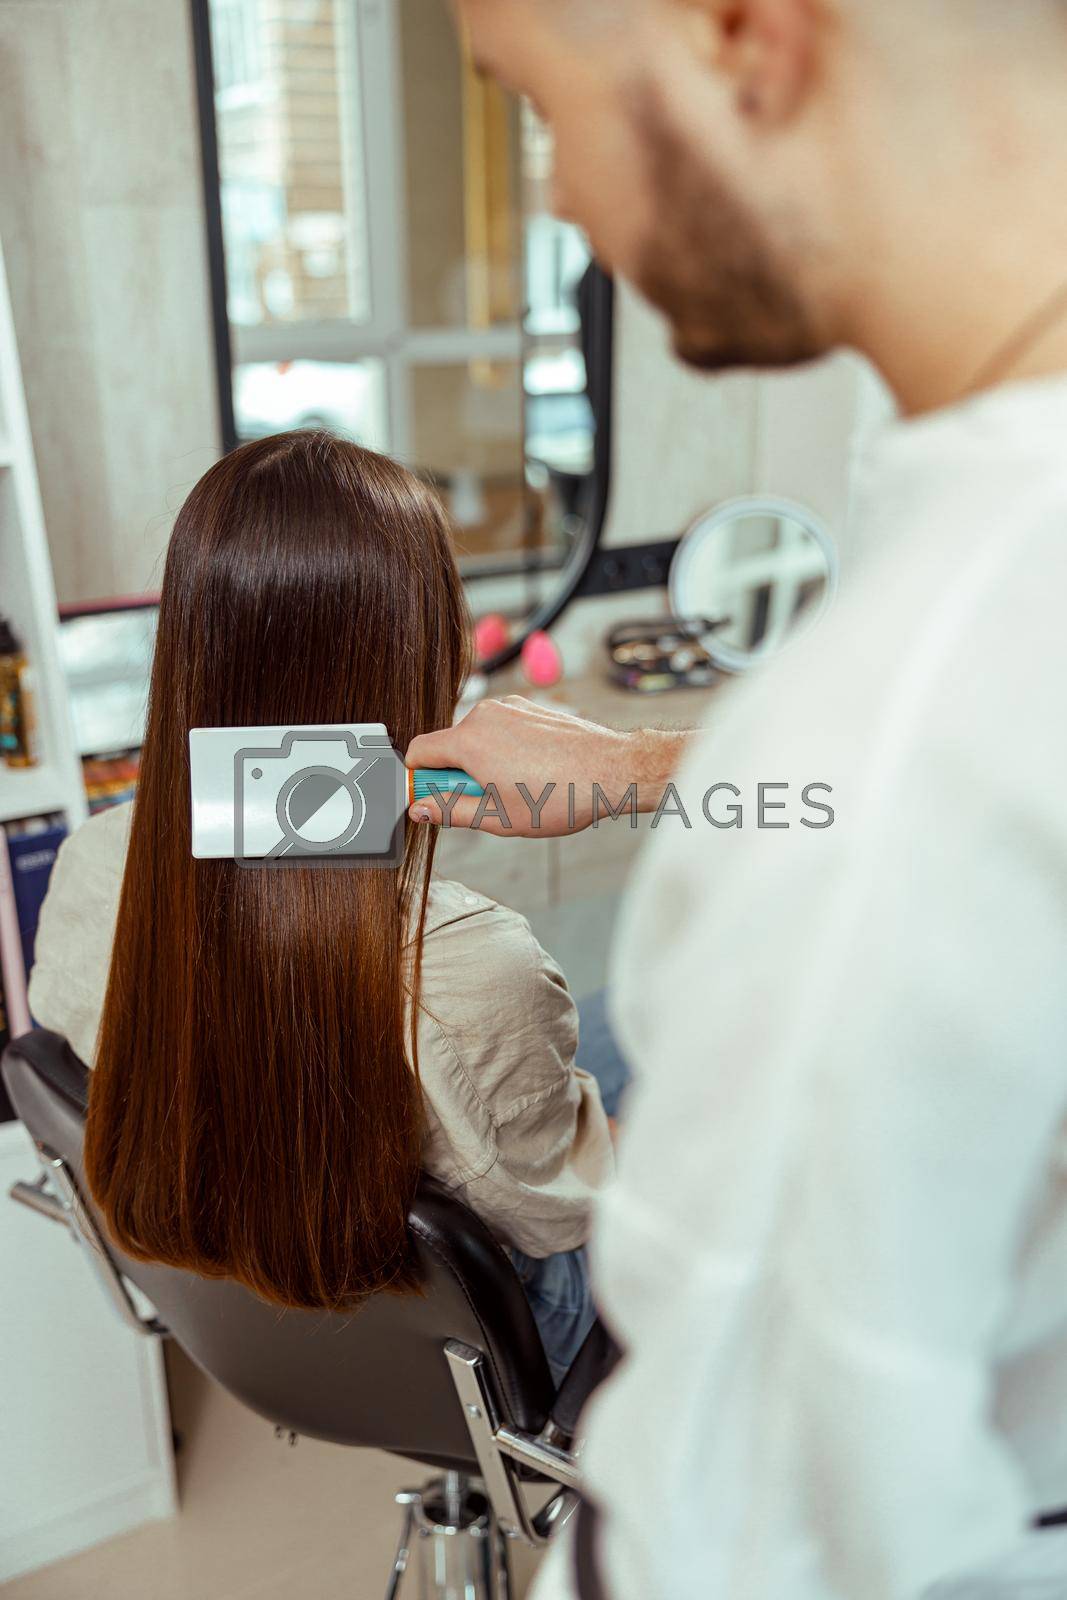 Hairstylist brushing long and sleek brown hair of female client at beauty salon. Hair care